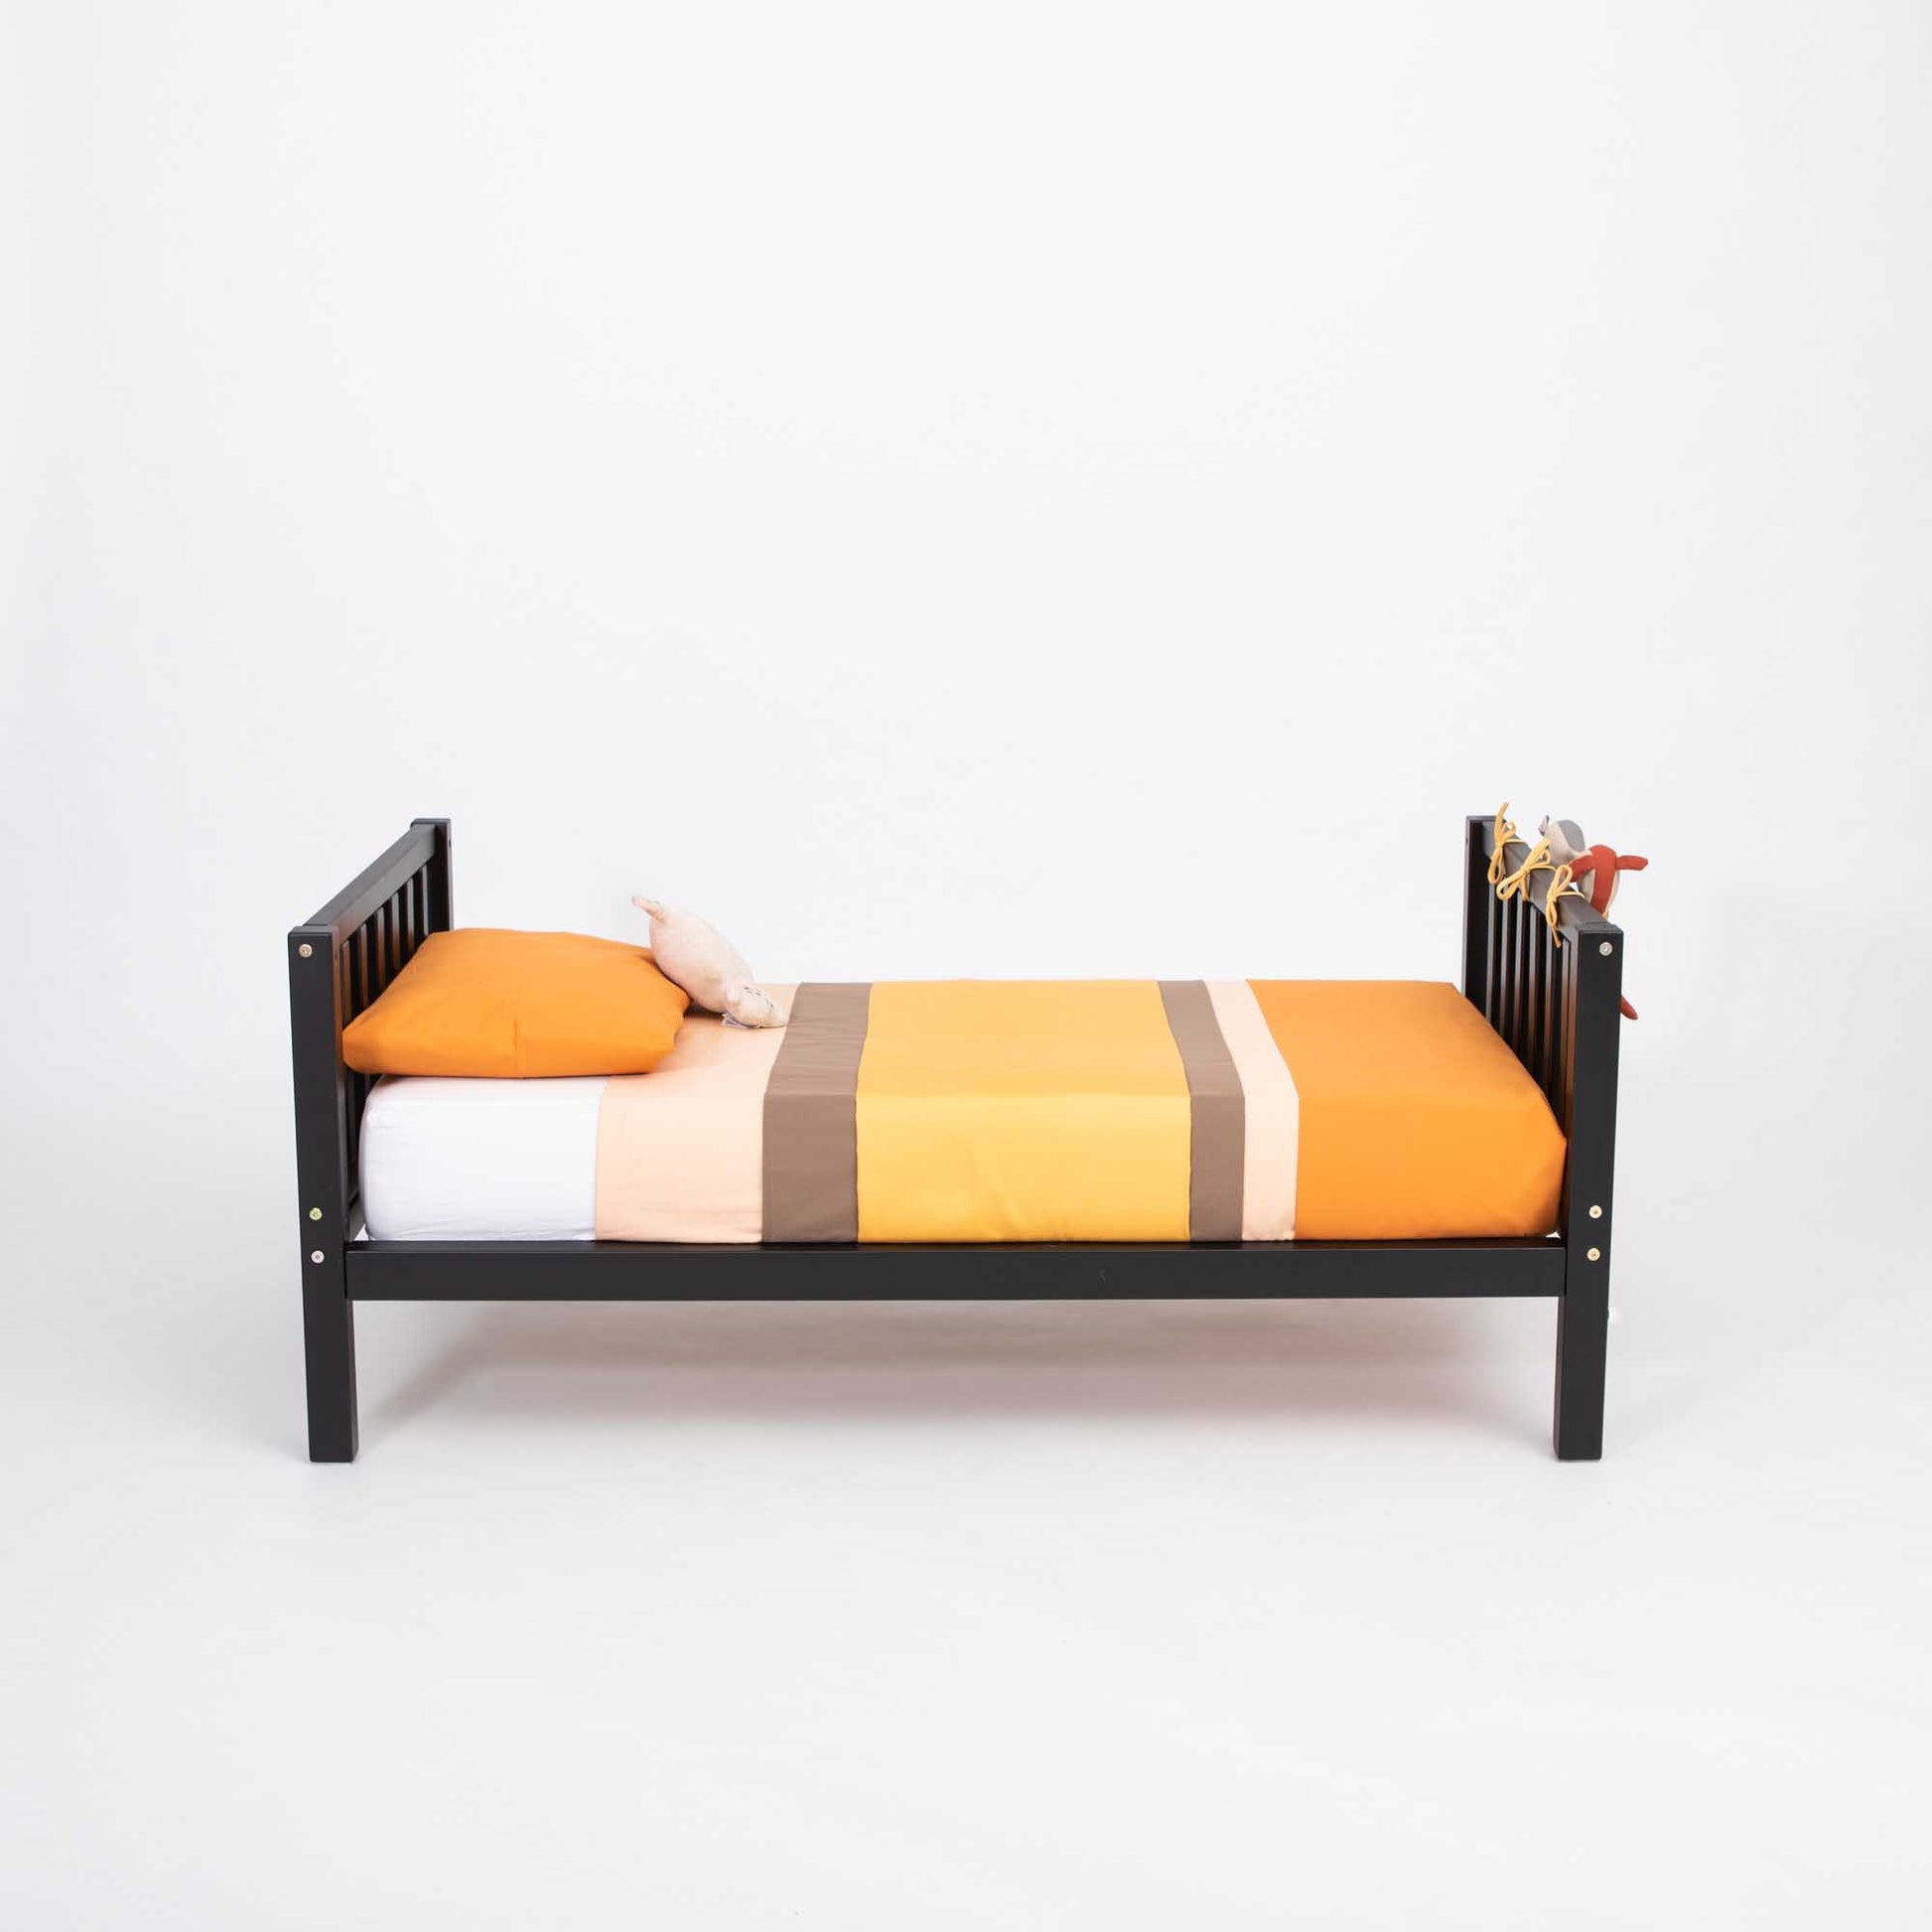 A Sweet Home From Wood Raised kids' bed on legs with a headboard and footboard, made of solid wood and inspired by Montessori, providing independence and adorned with an orange and yellow comforter.